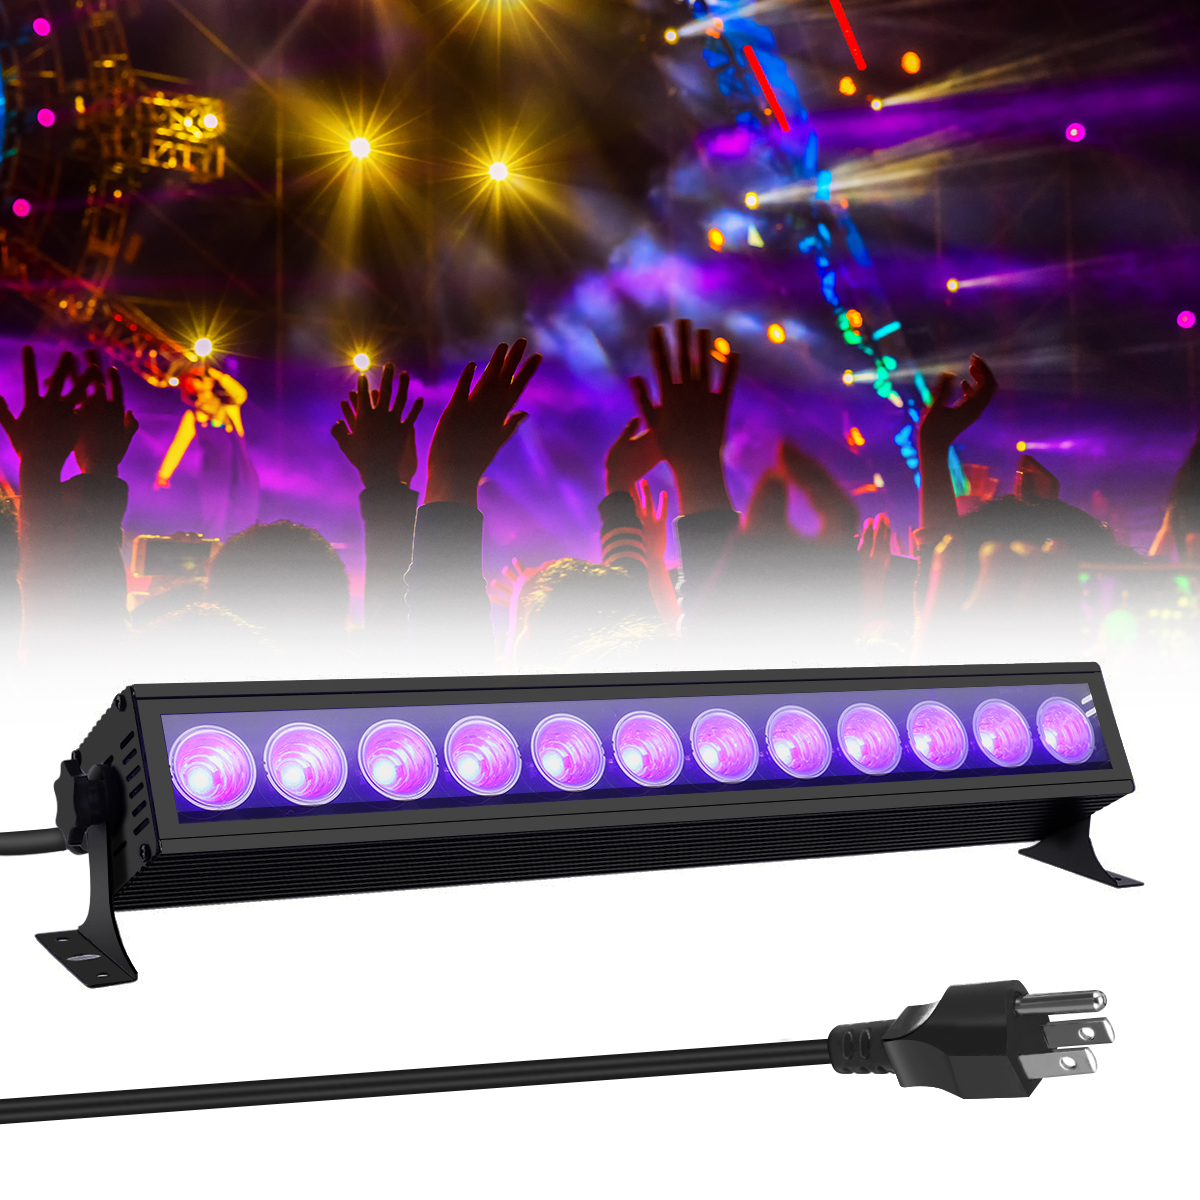 Find GLIME 12LED 36W UV LED Light Bar 360Â° Adjustable Wall Lights Lamp for DJ Stage Party for Sale on Gipsybee.com with cryptocurrencies